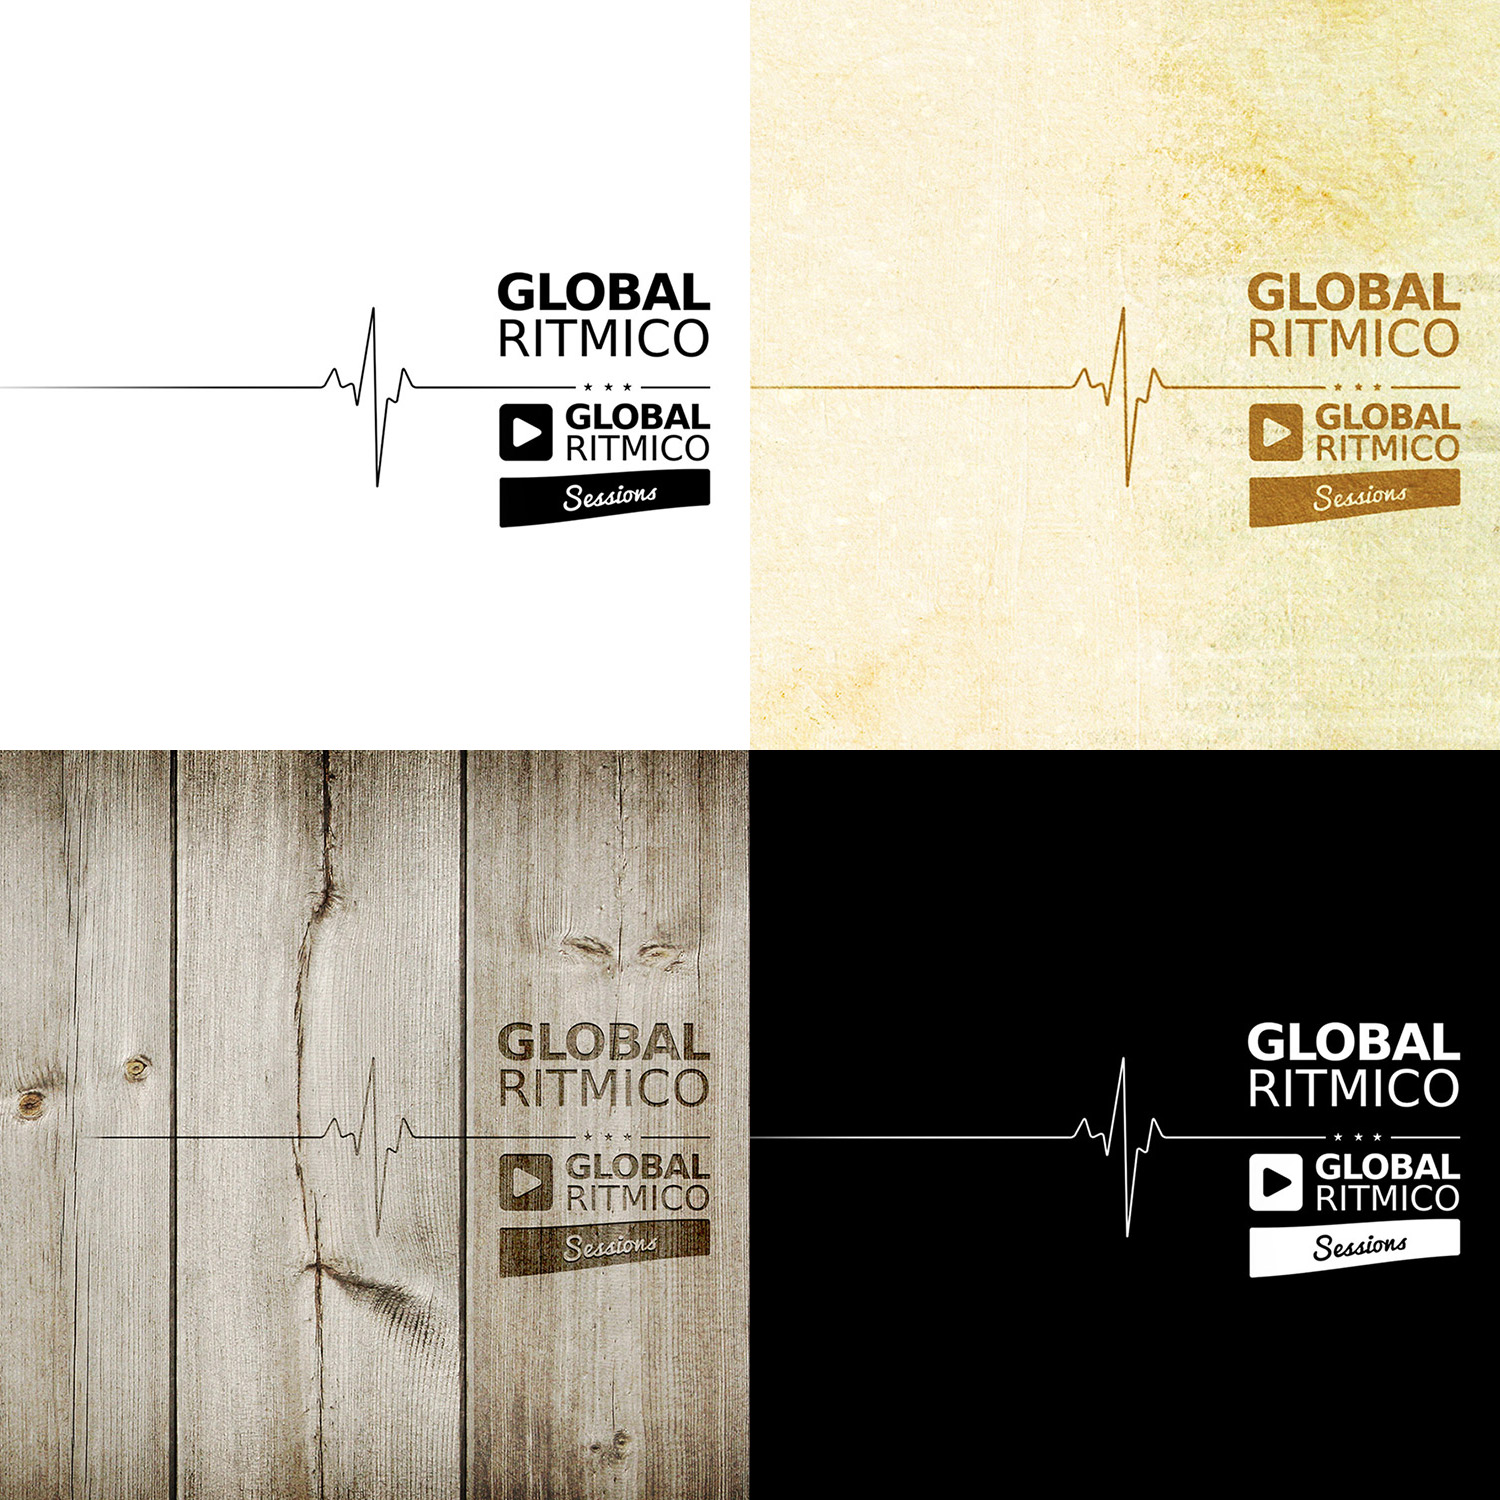 Global Ritmico & Global Ritmico Sessions Heartbeat - Plywood , HD Wallpaper & Backgrounds